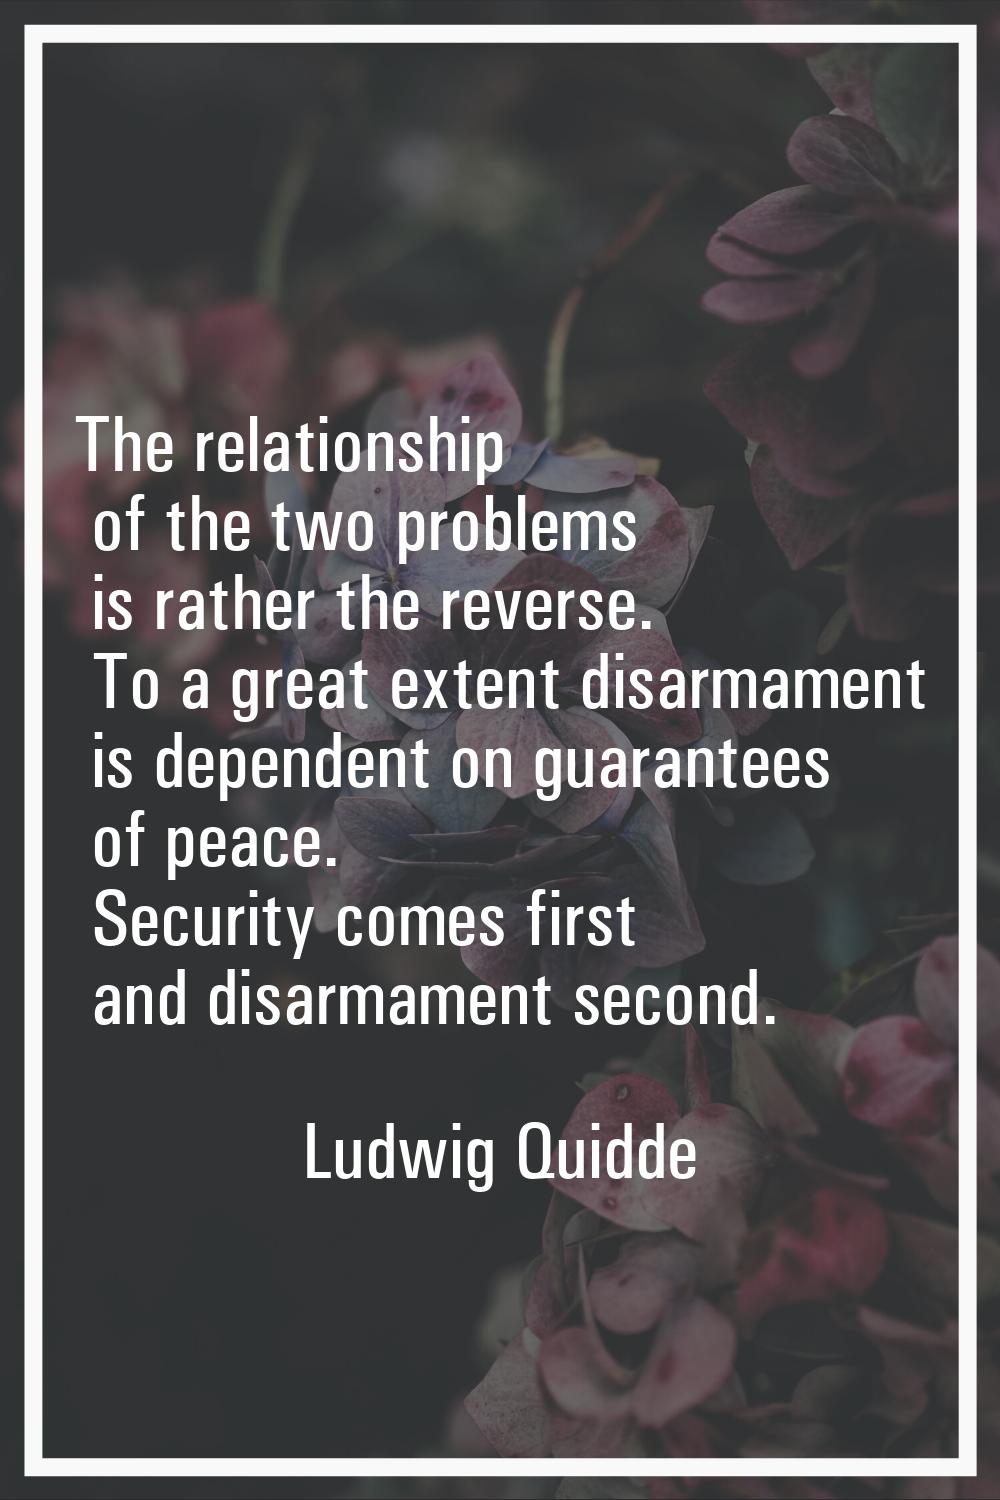 The relationship of the two problems is rather the reverse. To a great extent disarmament is depend